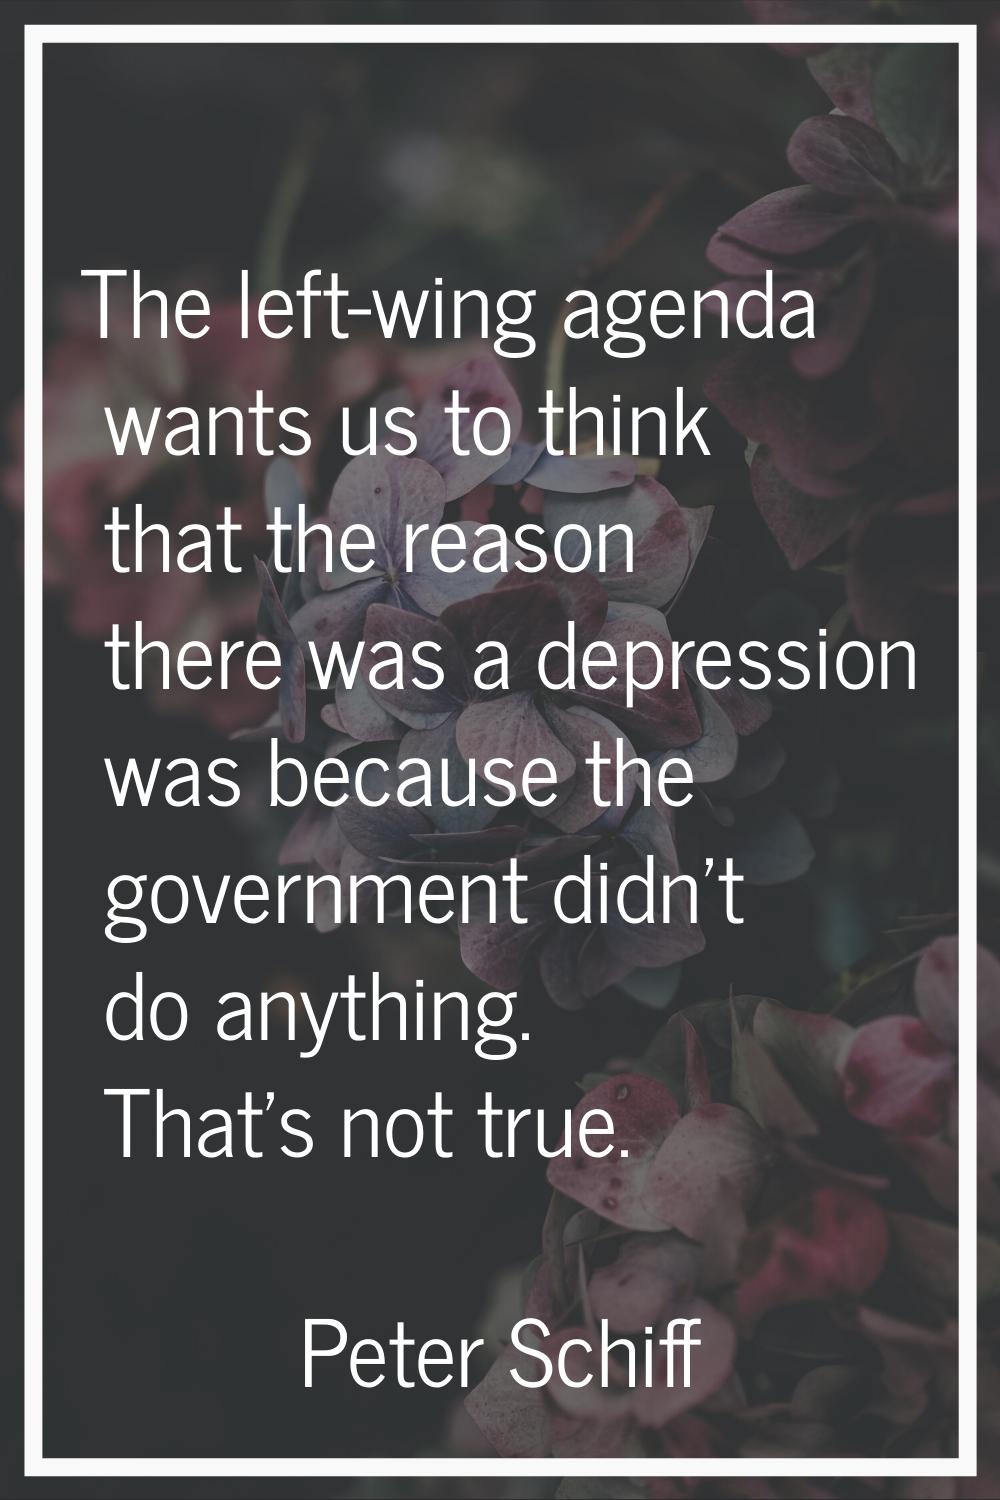 The left-wing agenda wants us to think that the reason there was a depression was because the gover